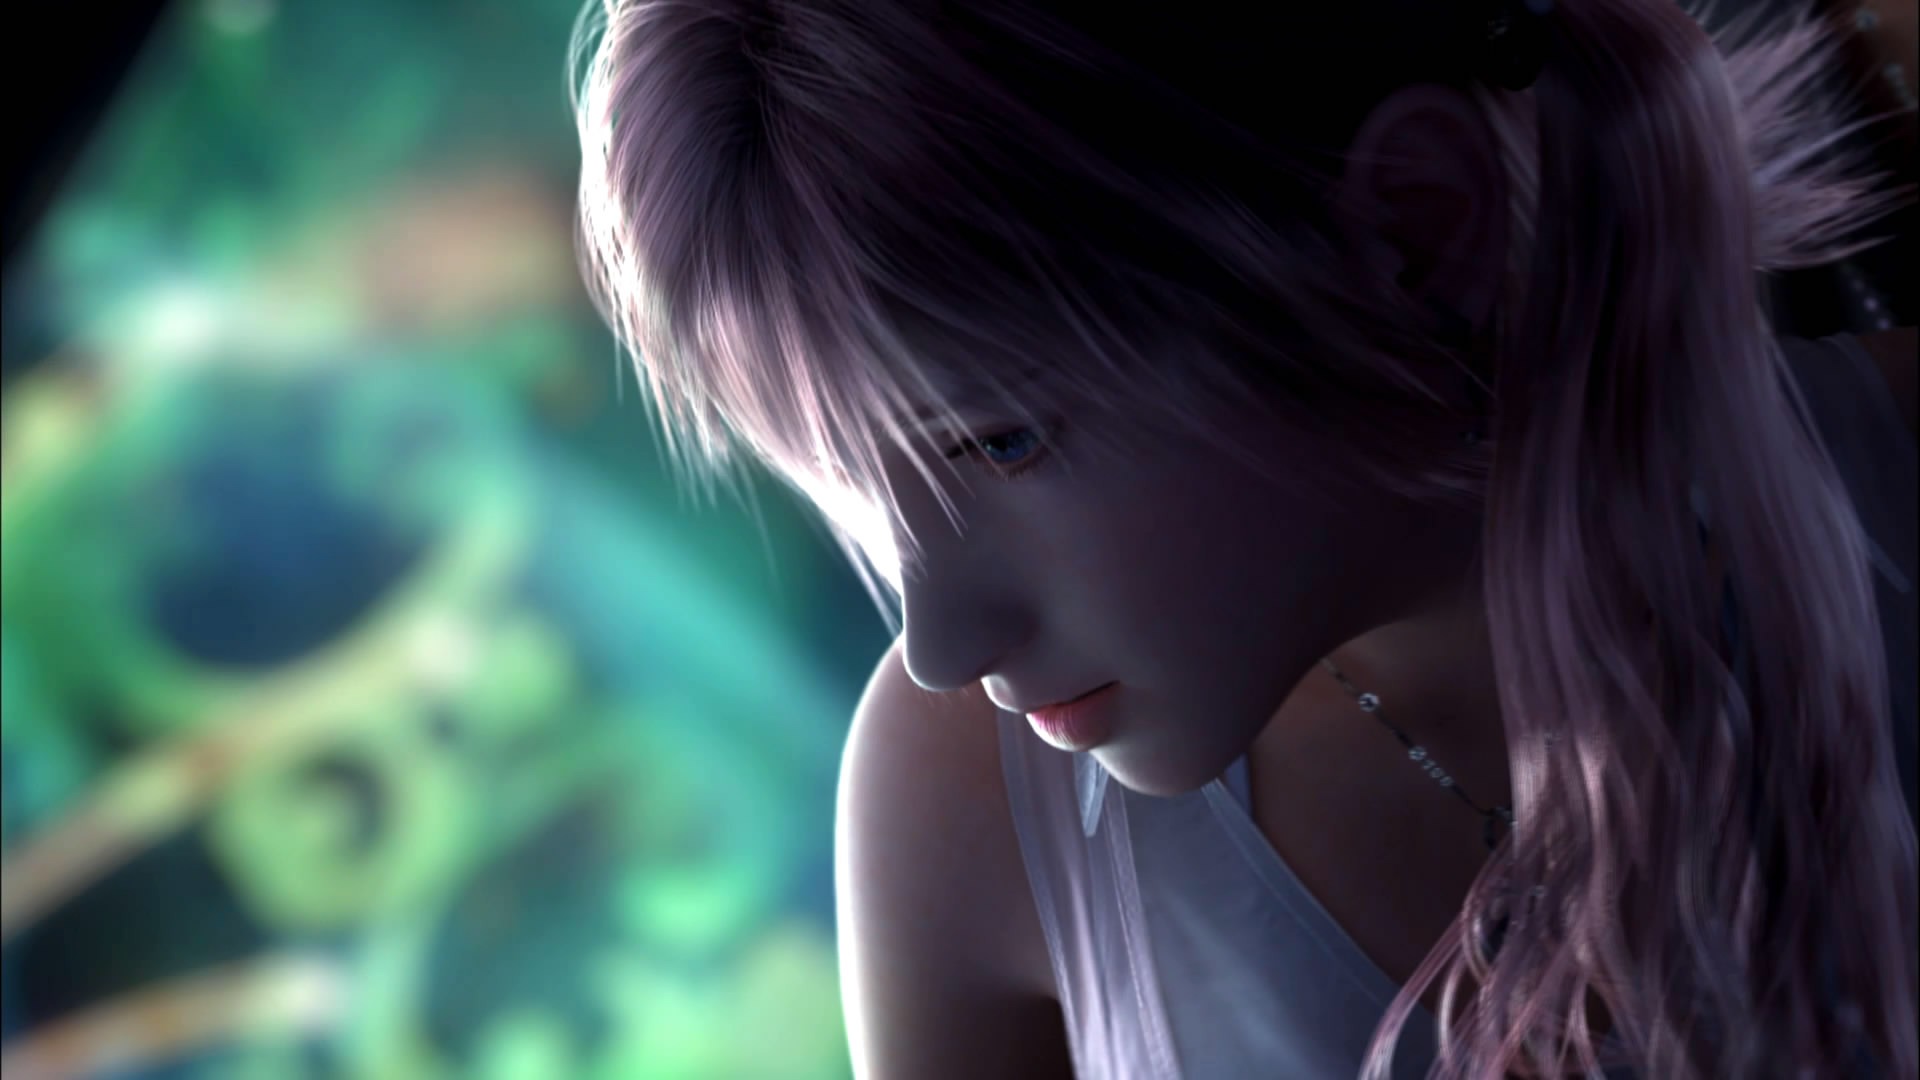 Final Fantasy Wallpapers HD Wallpapers, Backgrounds, Images, Art